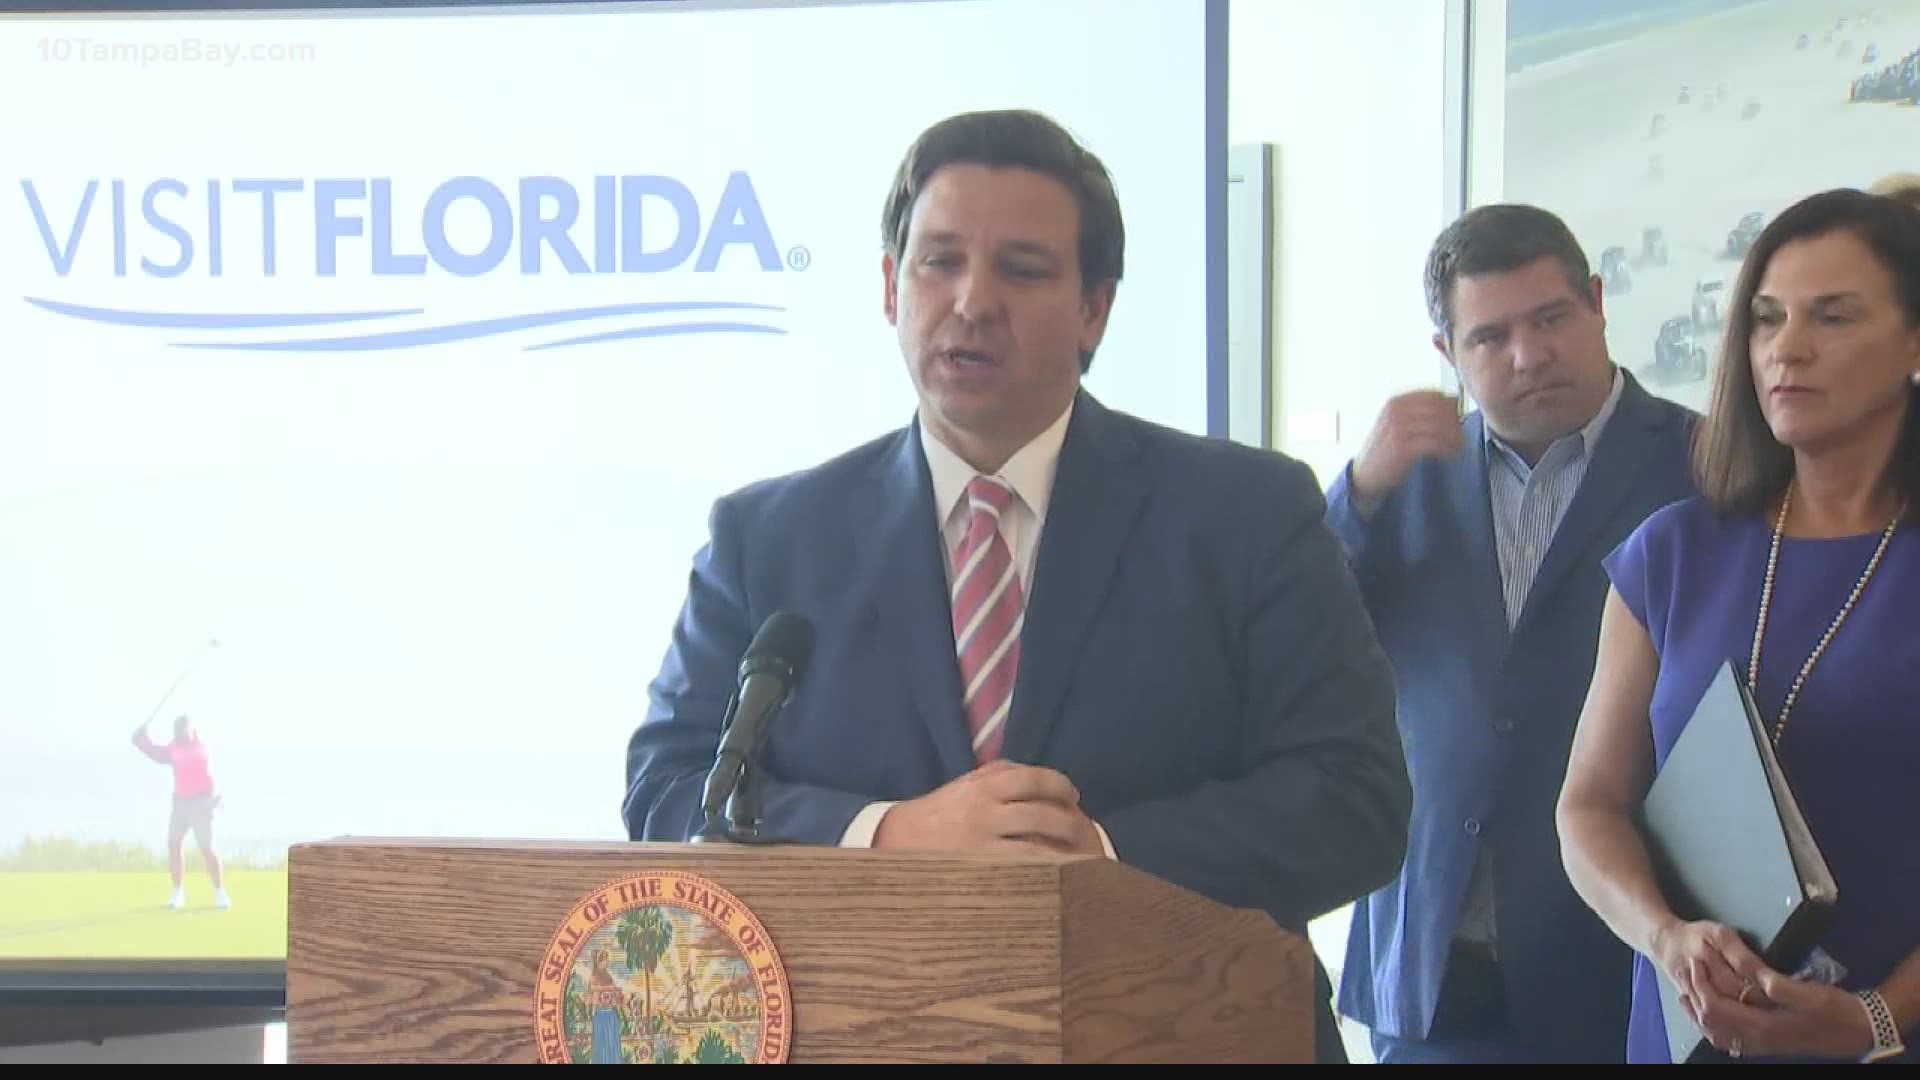 The in-state campaign aims to help Florida's economy recover during the pandemic.